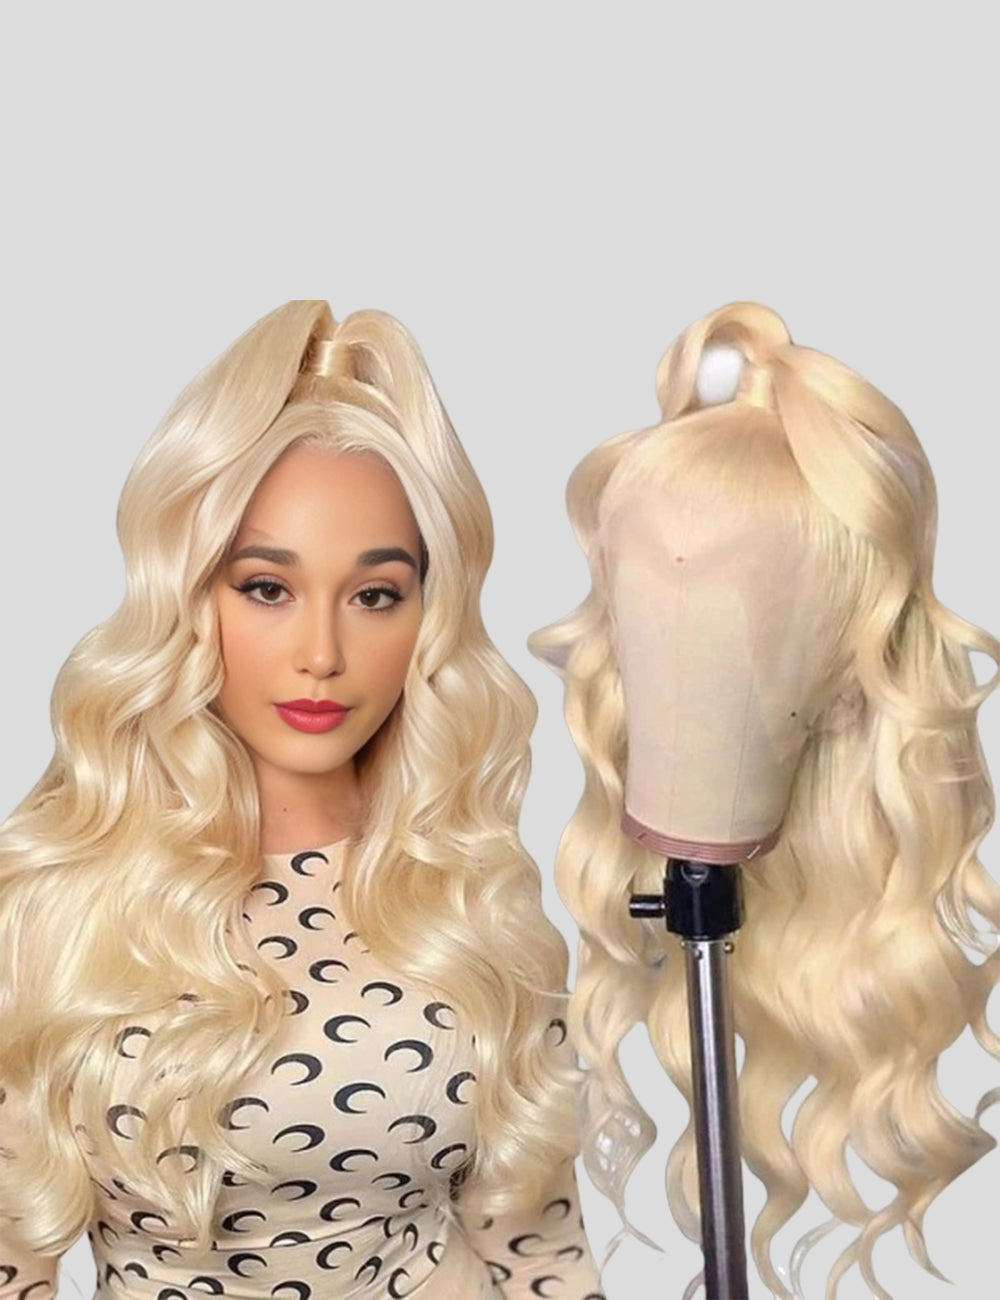 613 Blonde Wig Body Wave Human Hair Wigs 4x4 Lace Closure Wig With Natural Hairline